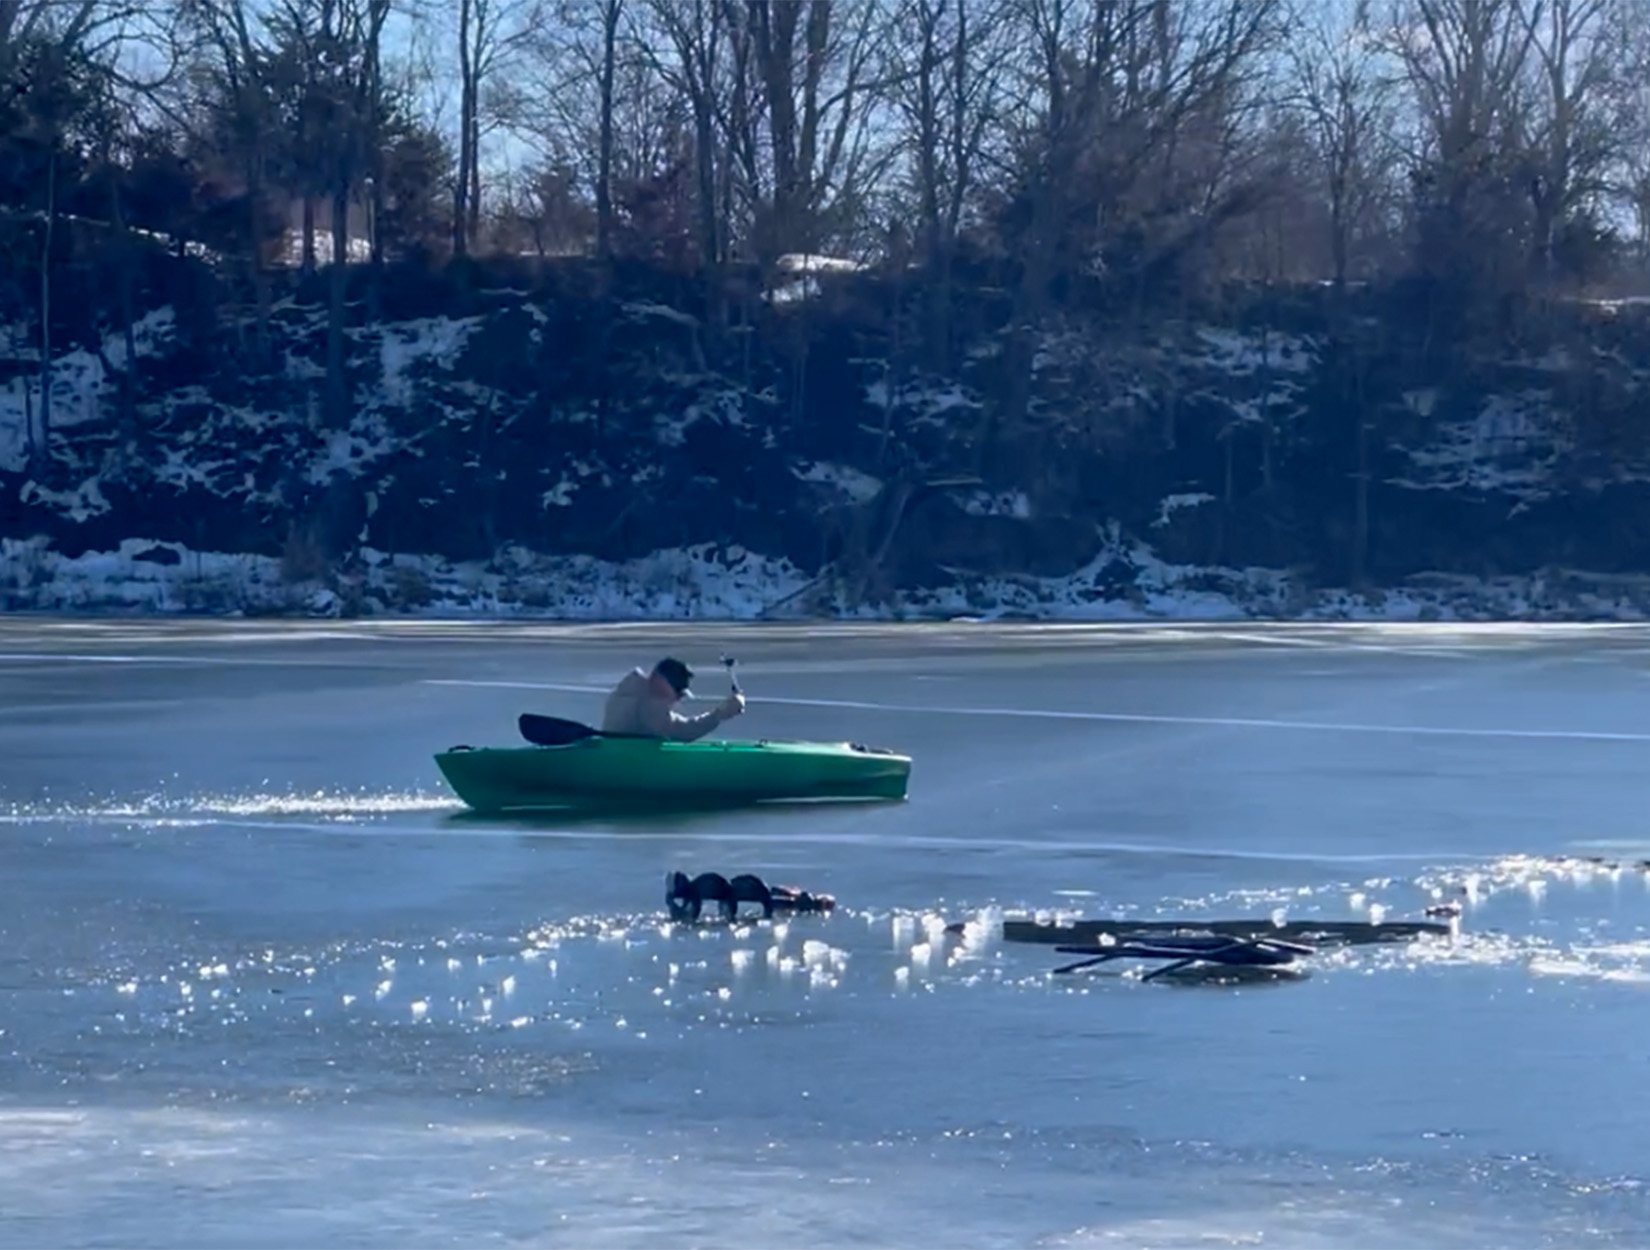 An ice fisherman scoots across the lake in a kayak.